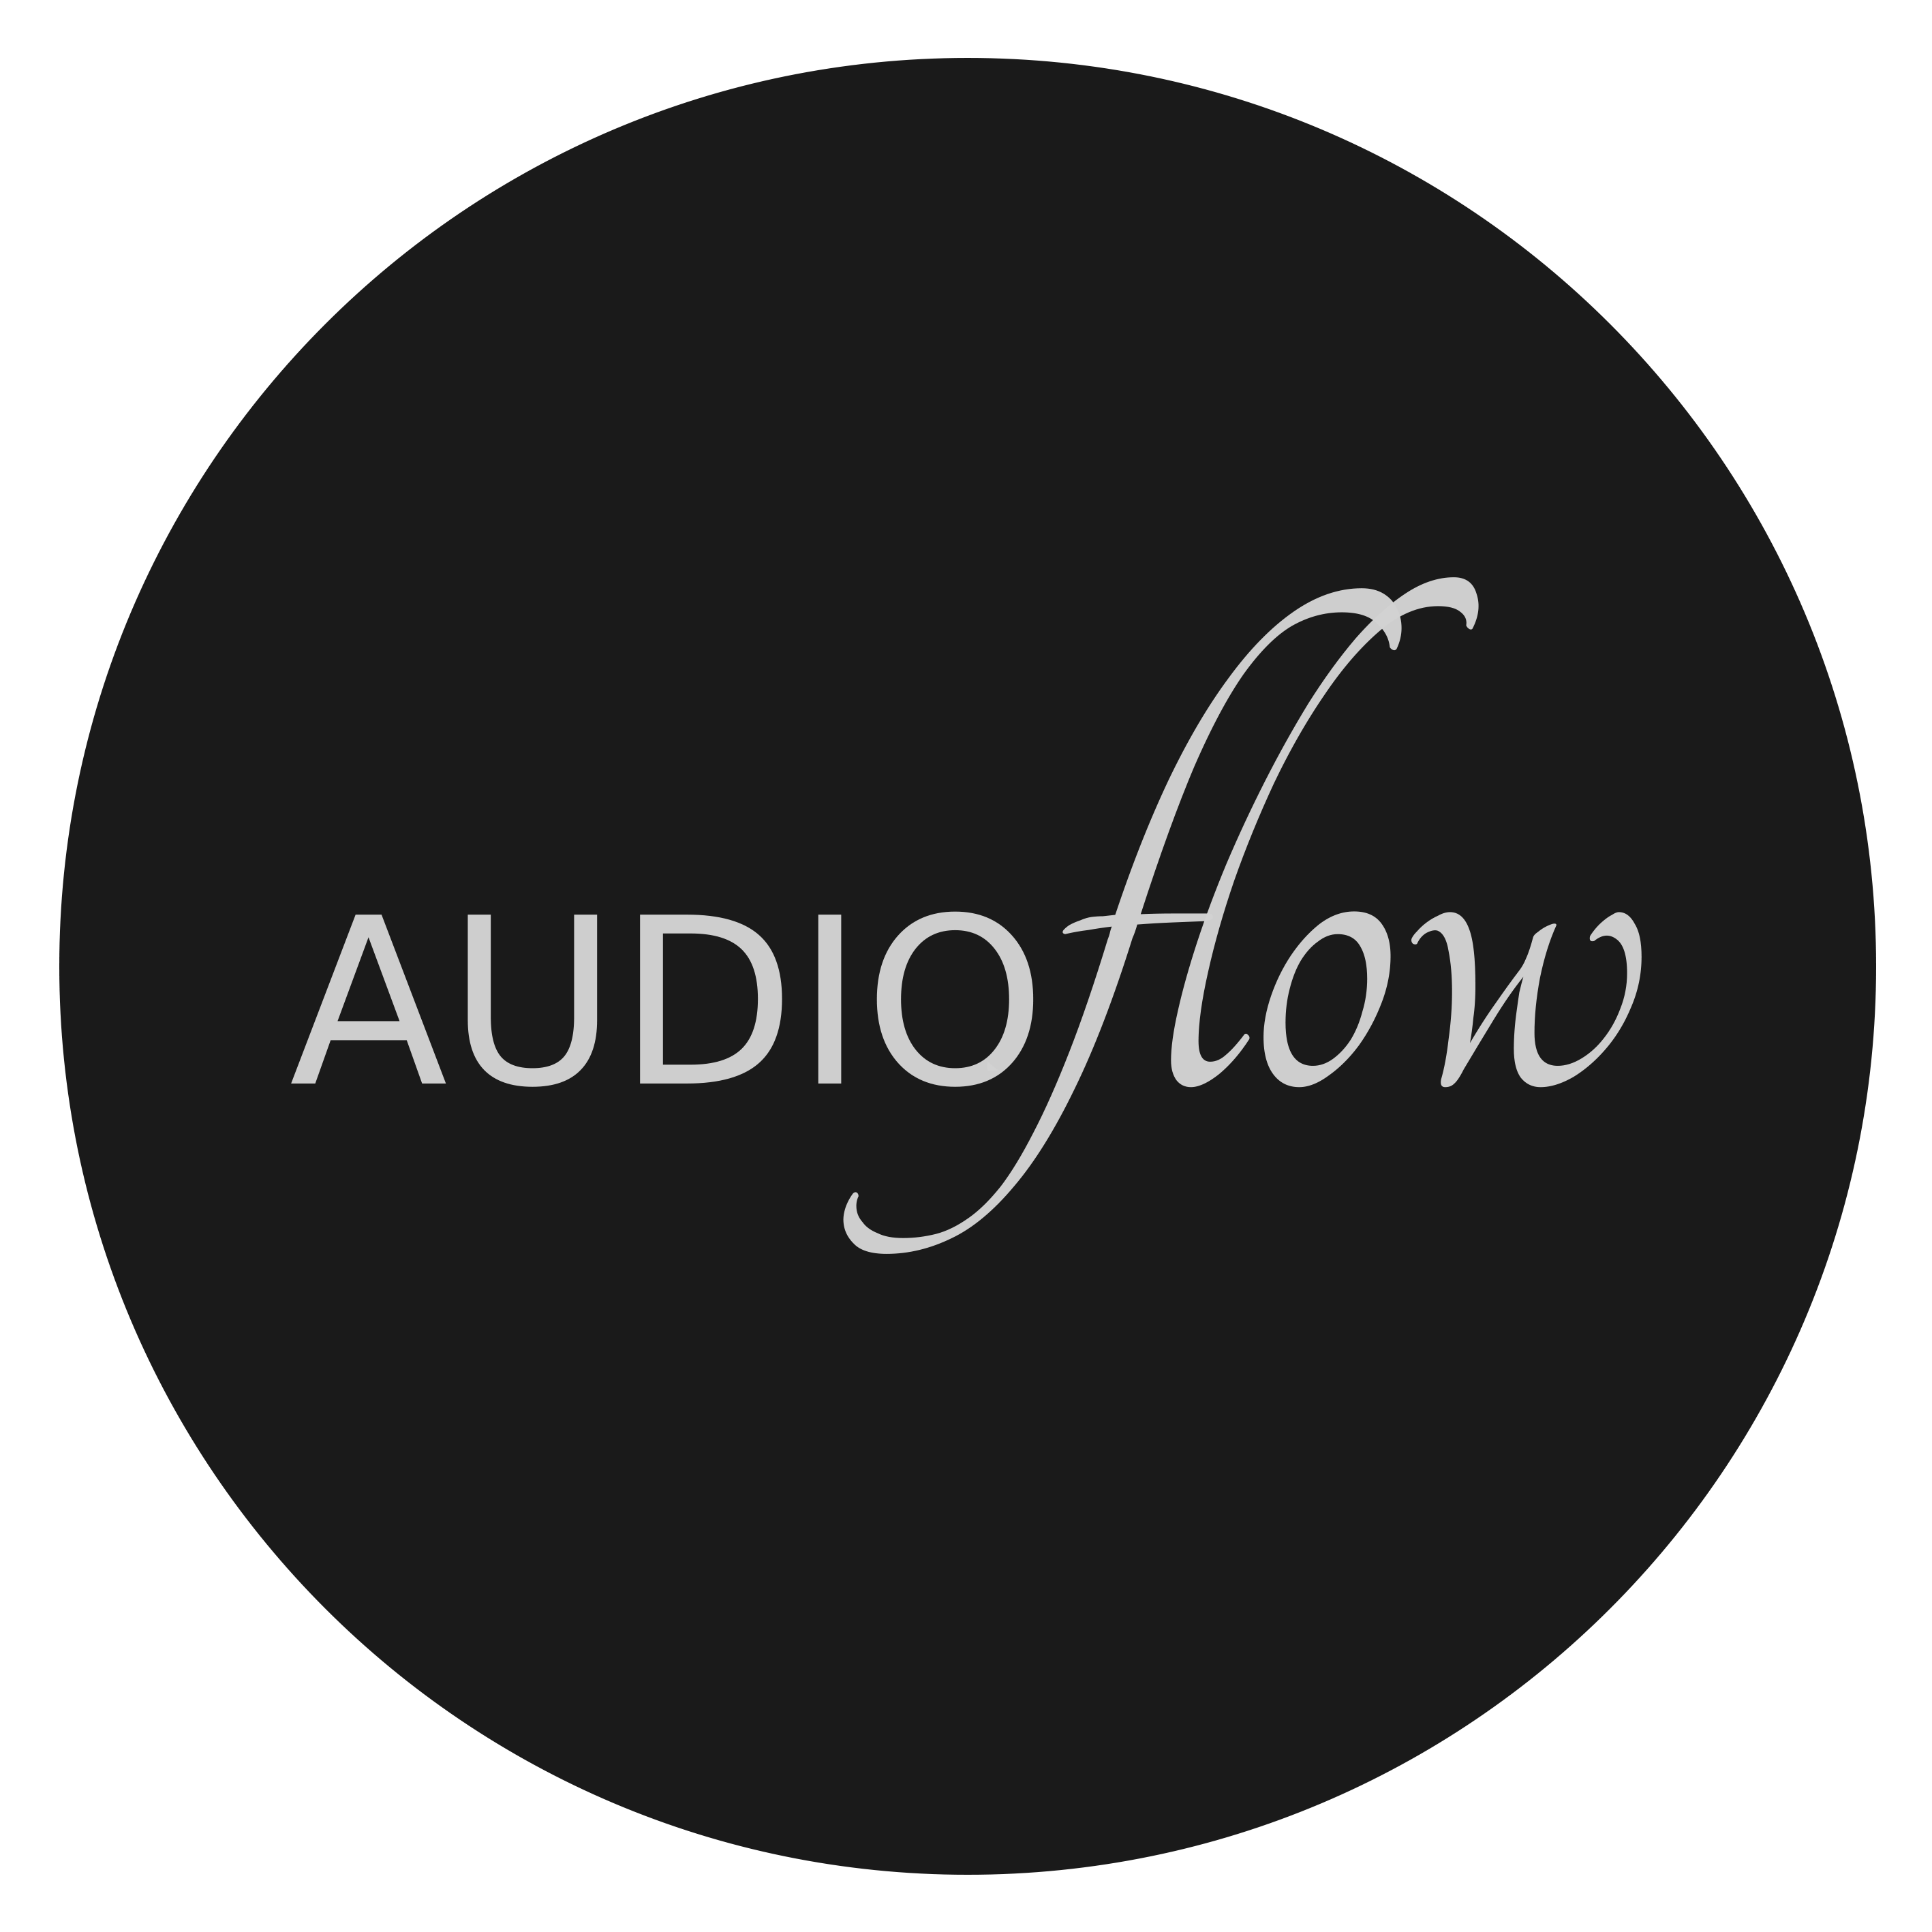 Audioflow switching in uOS